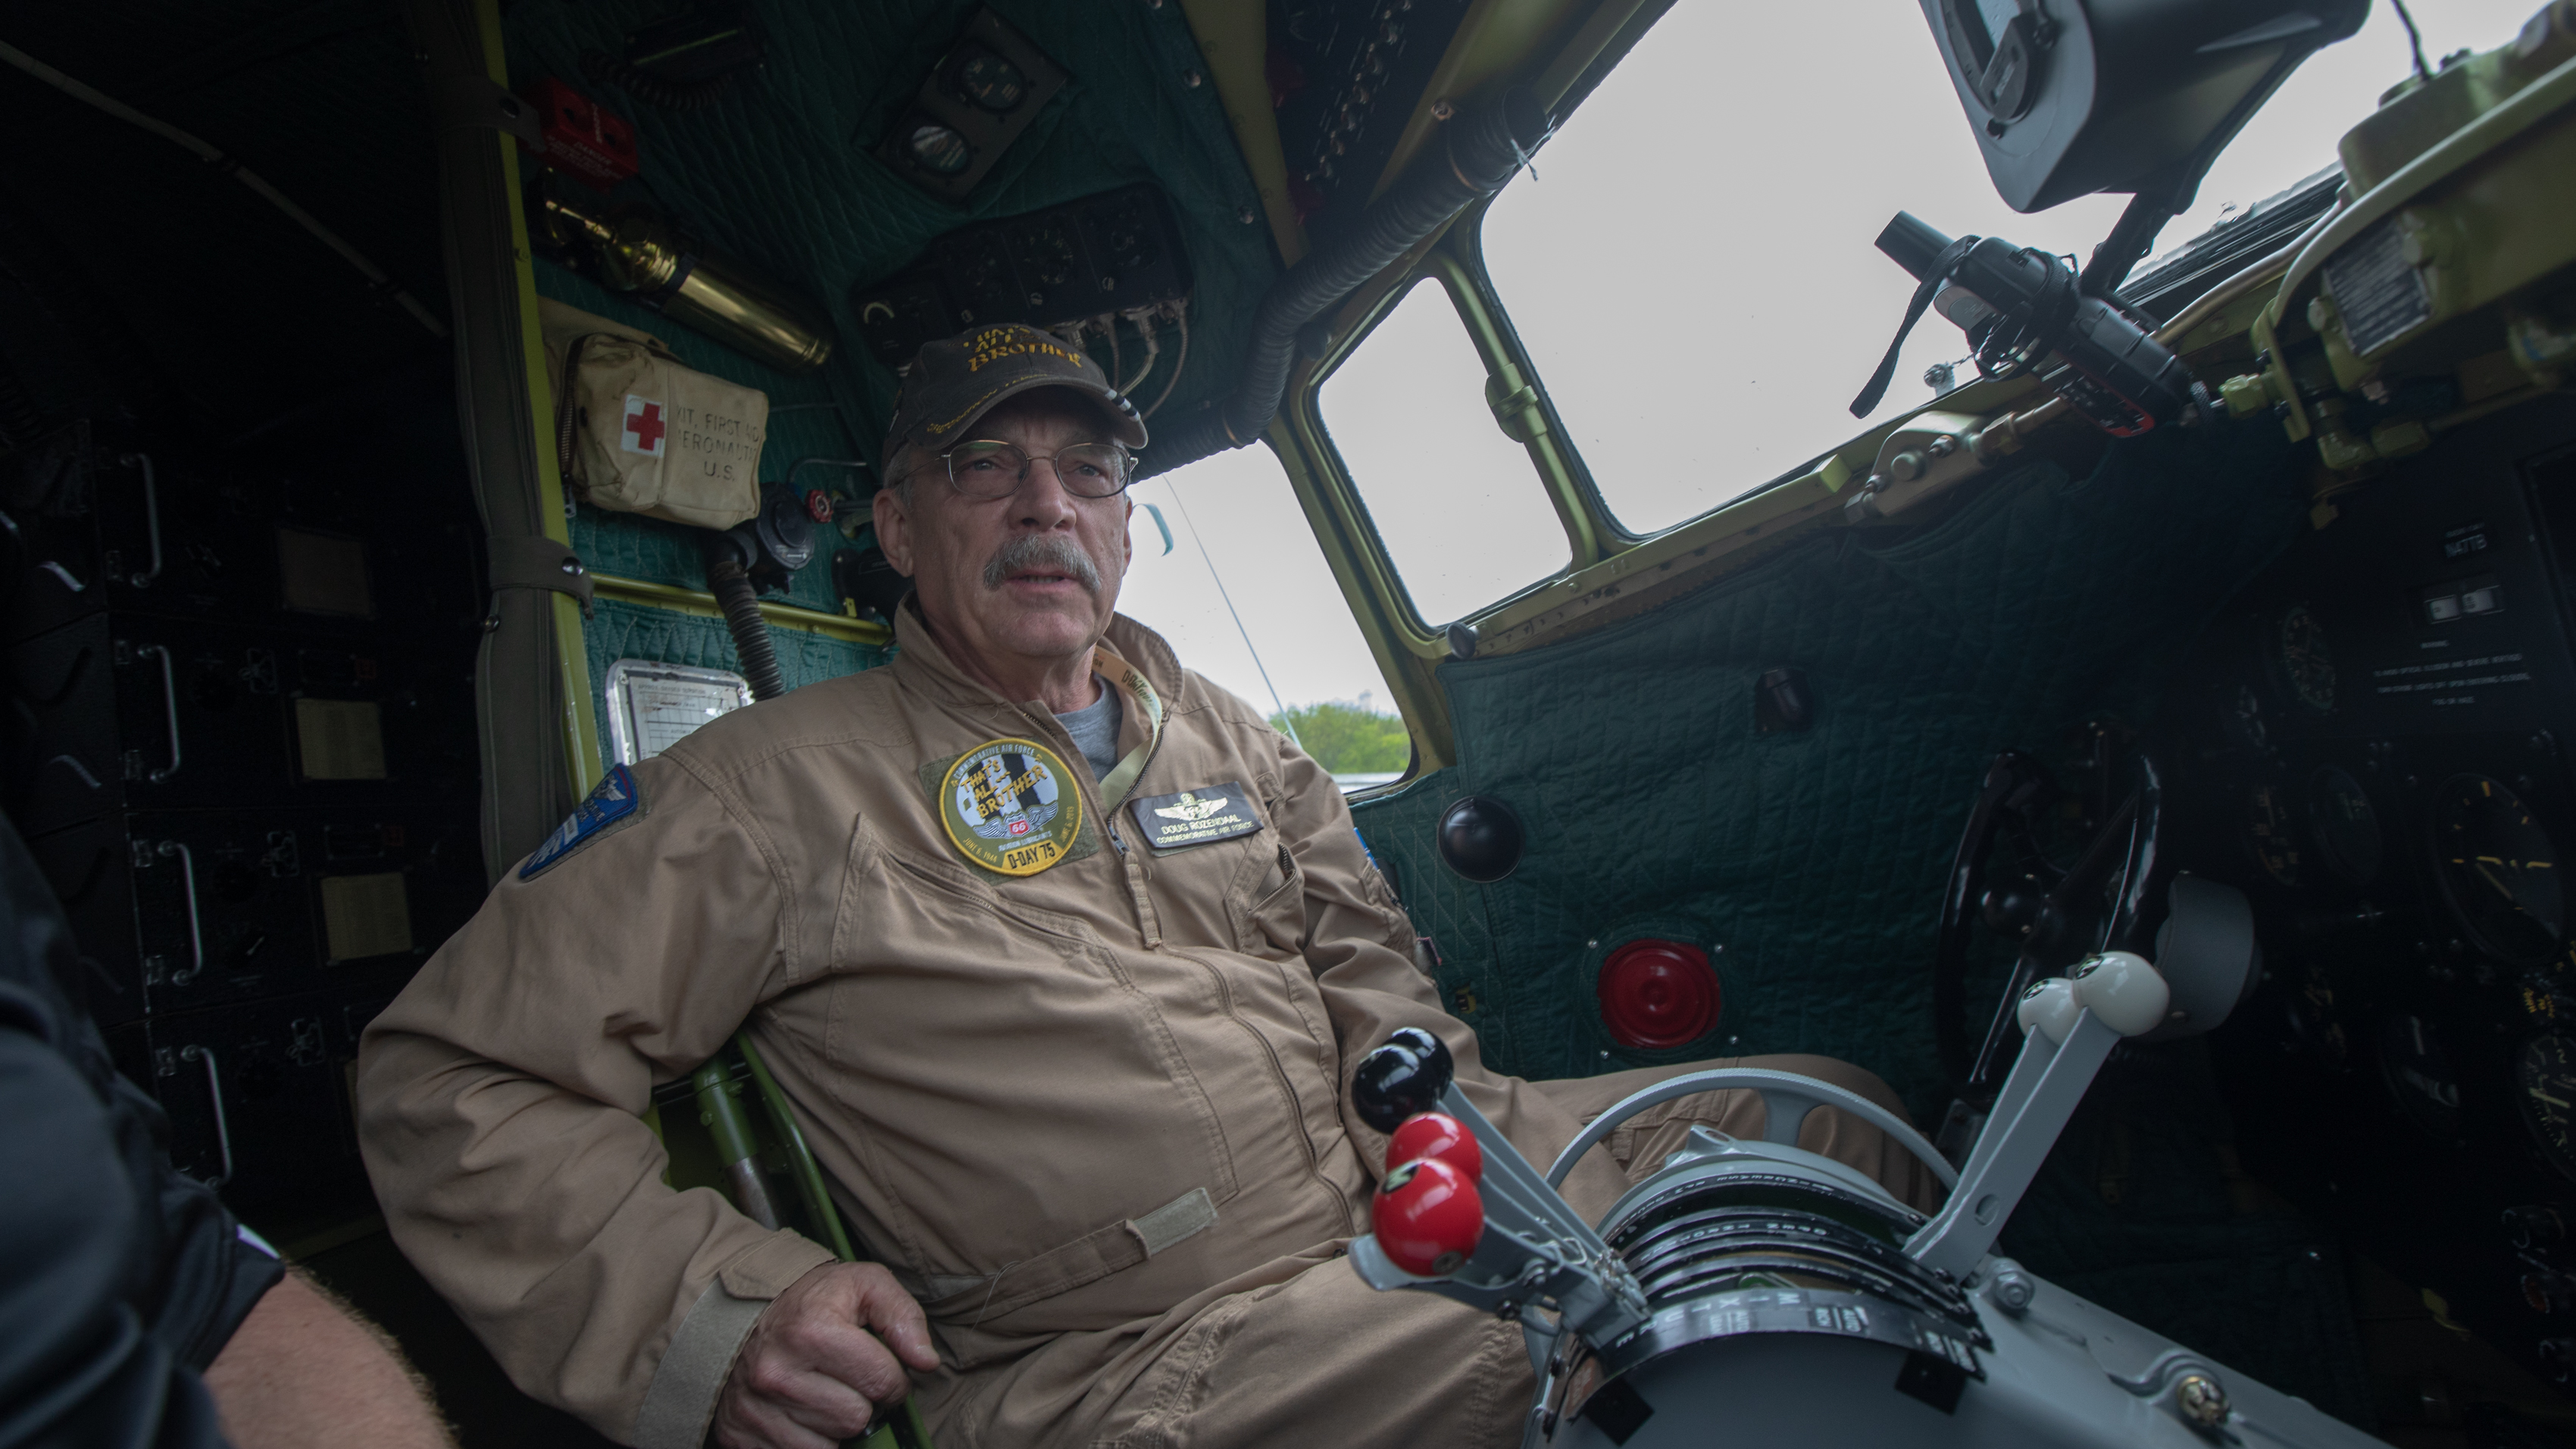 Doug Rozendaal, the Commemorative Air Force pilot of <em>That's All, Brother,</em> gives an interview in the cockpit. Photo by Jim Moore.